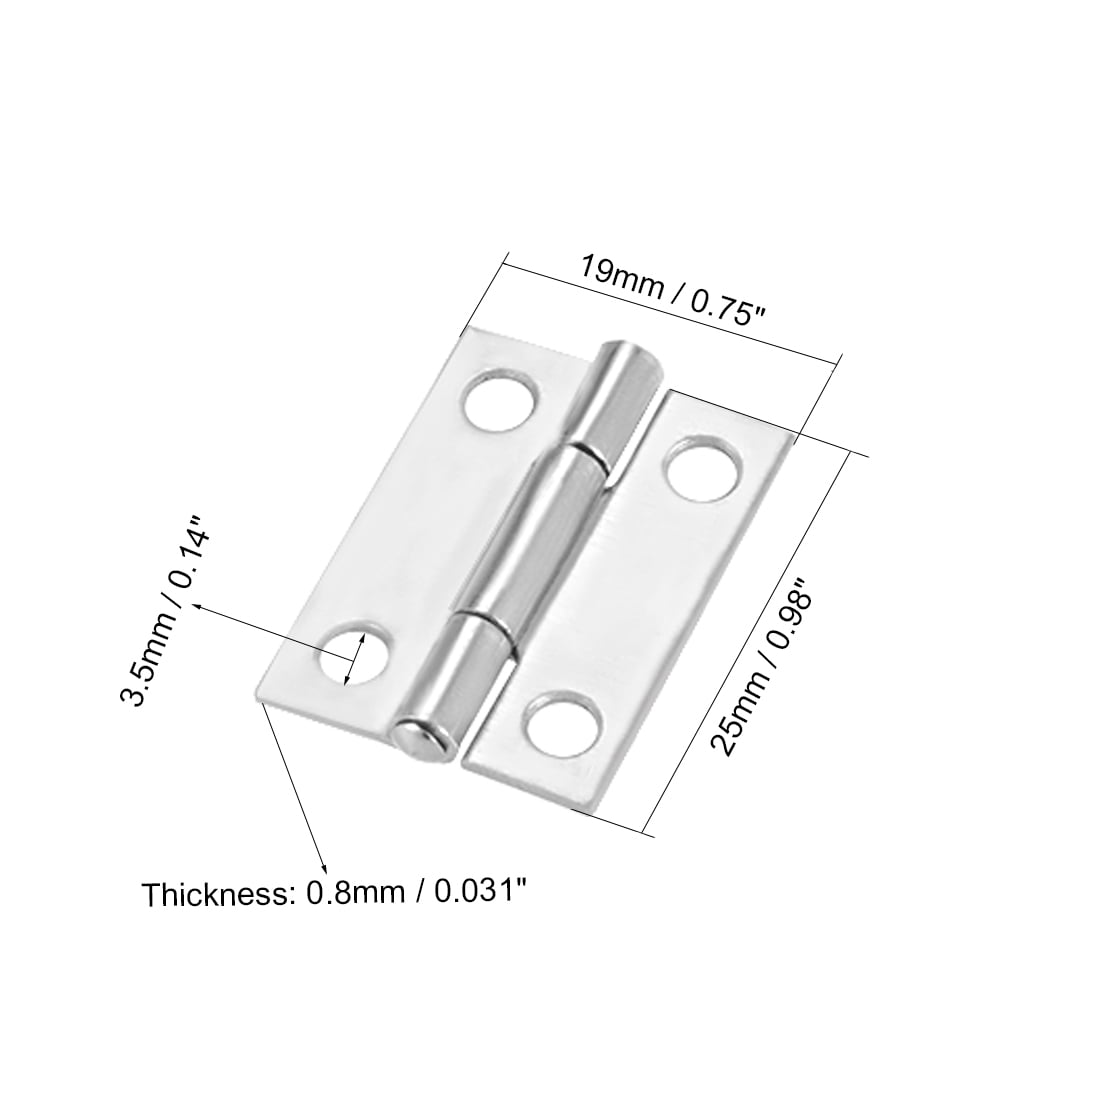 Details about   2/10Pcs Double Side Folded Hinges with Screws Box Cover Furniture Door Hardware 